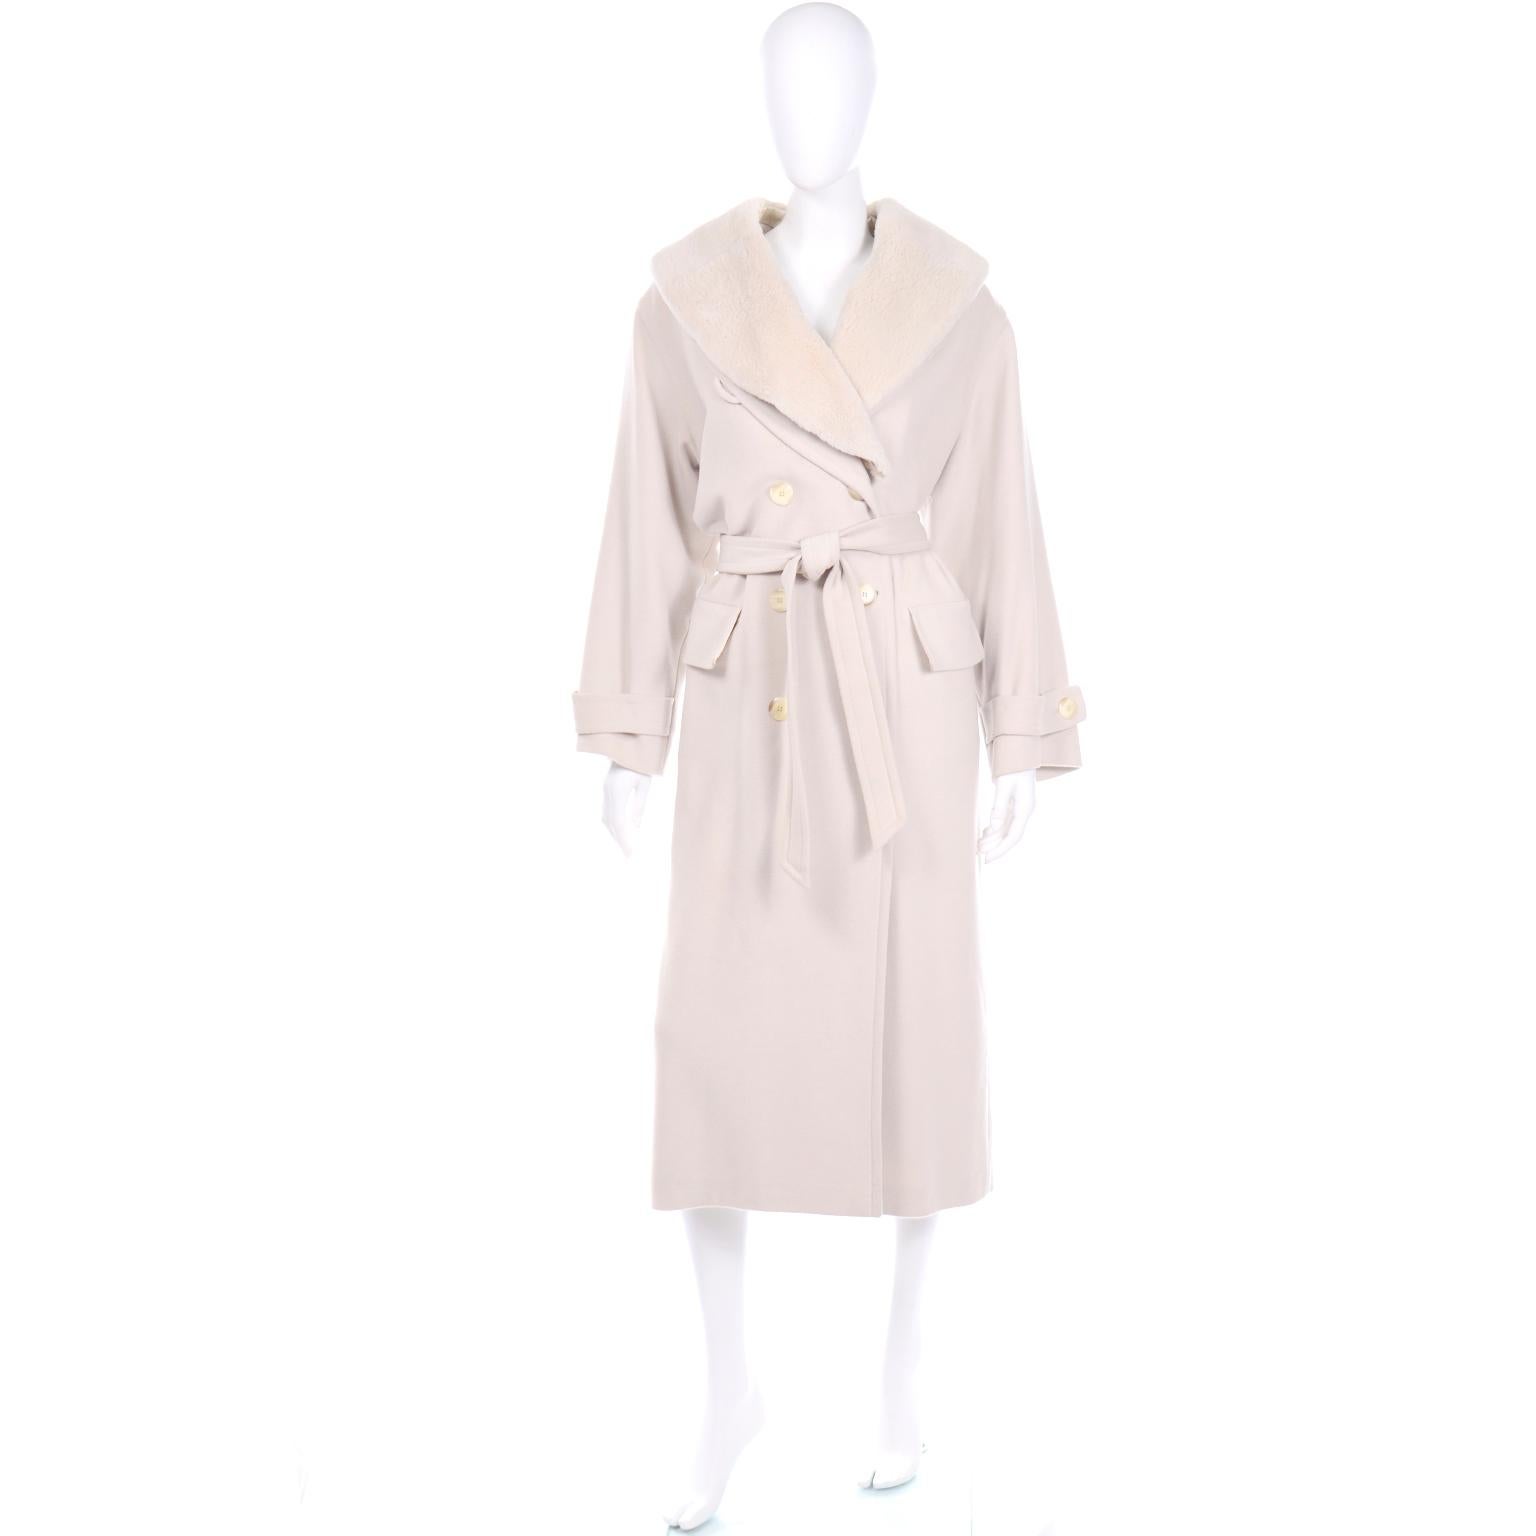 This vintage Louis Féraud double breasted cream coat is so versatile because it has a detachable plush faux fur collar. There is an extra button along the collar that you can fasten to have the fur inside. The cuffs have the same buttons and have an